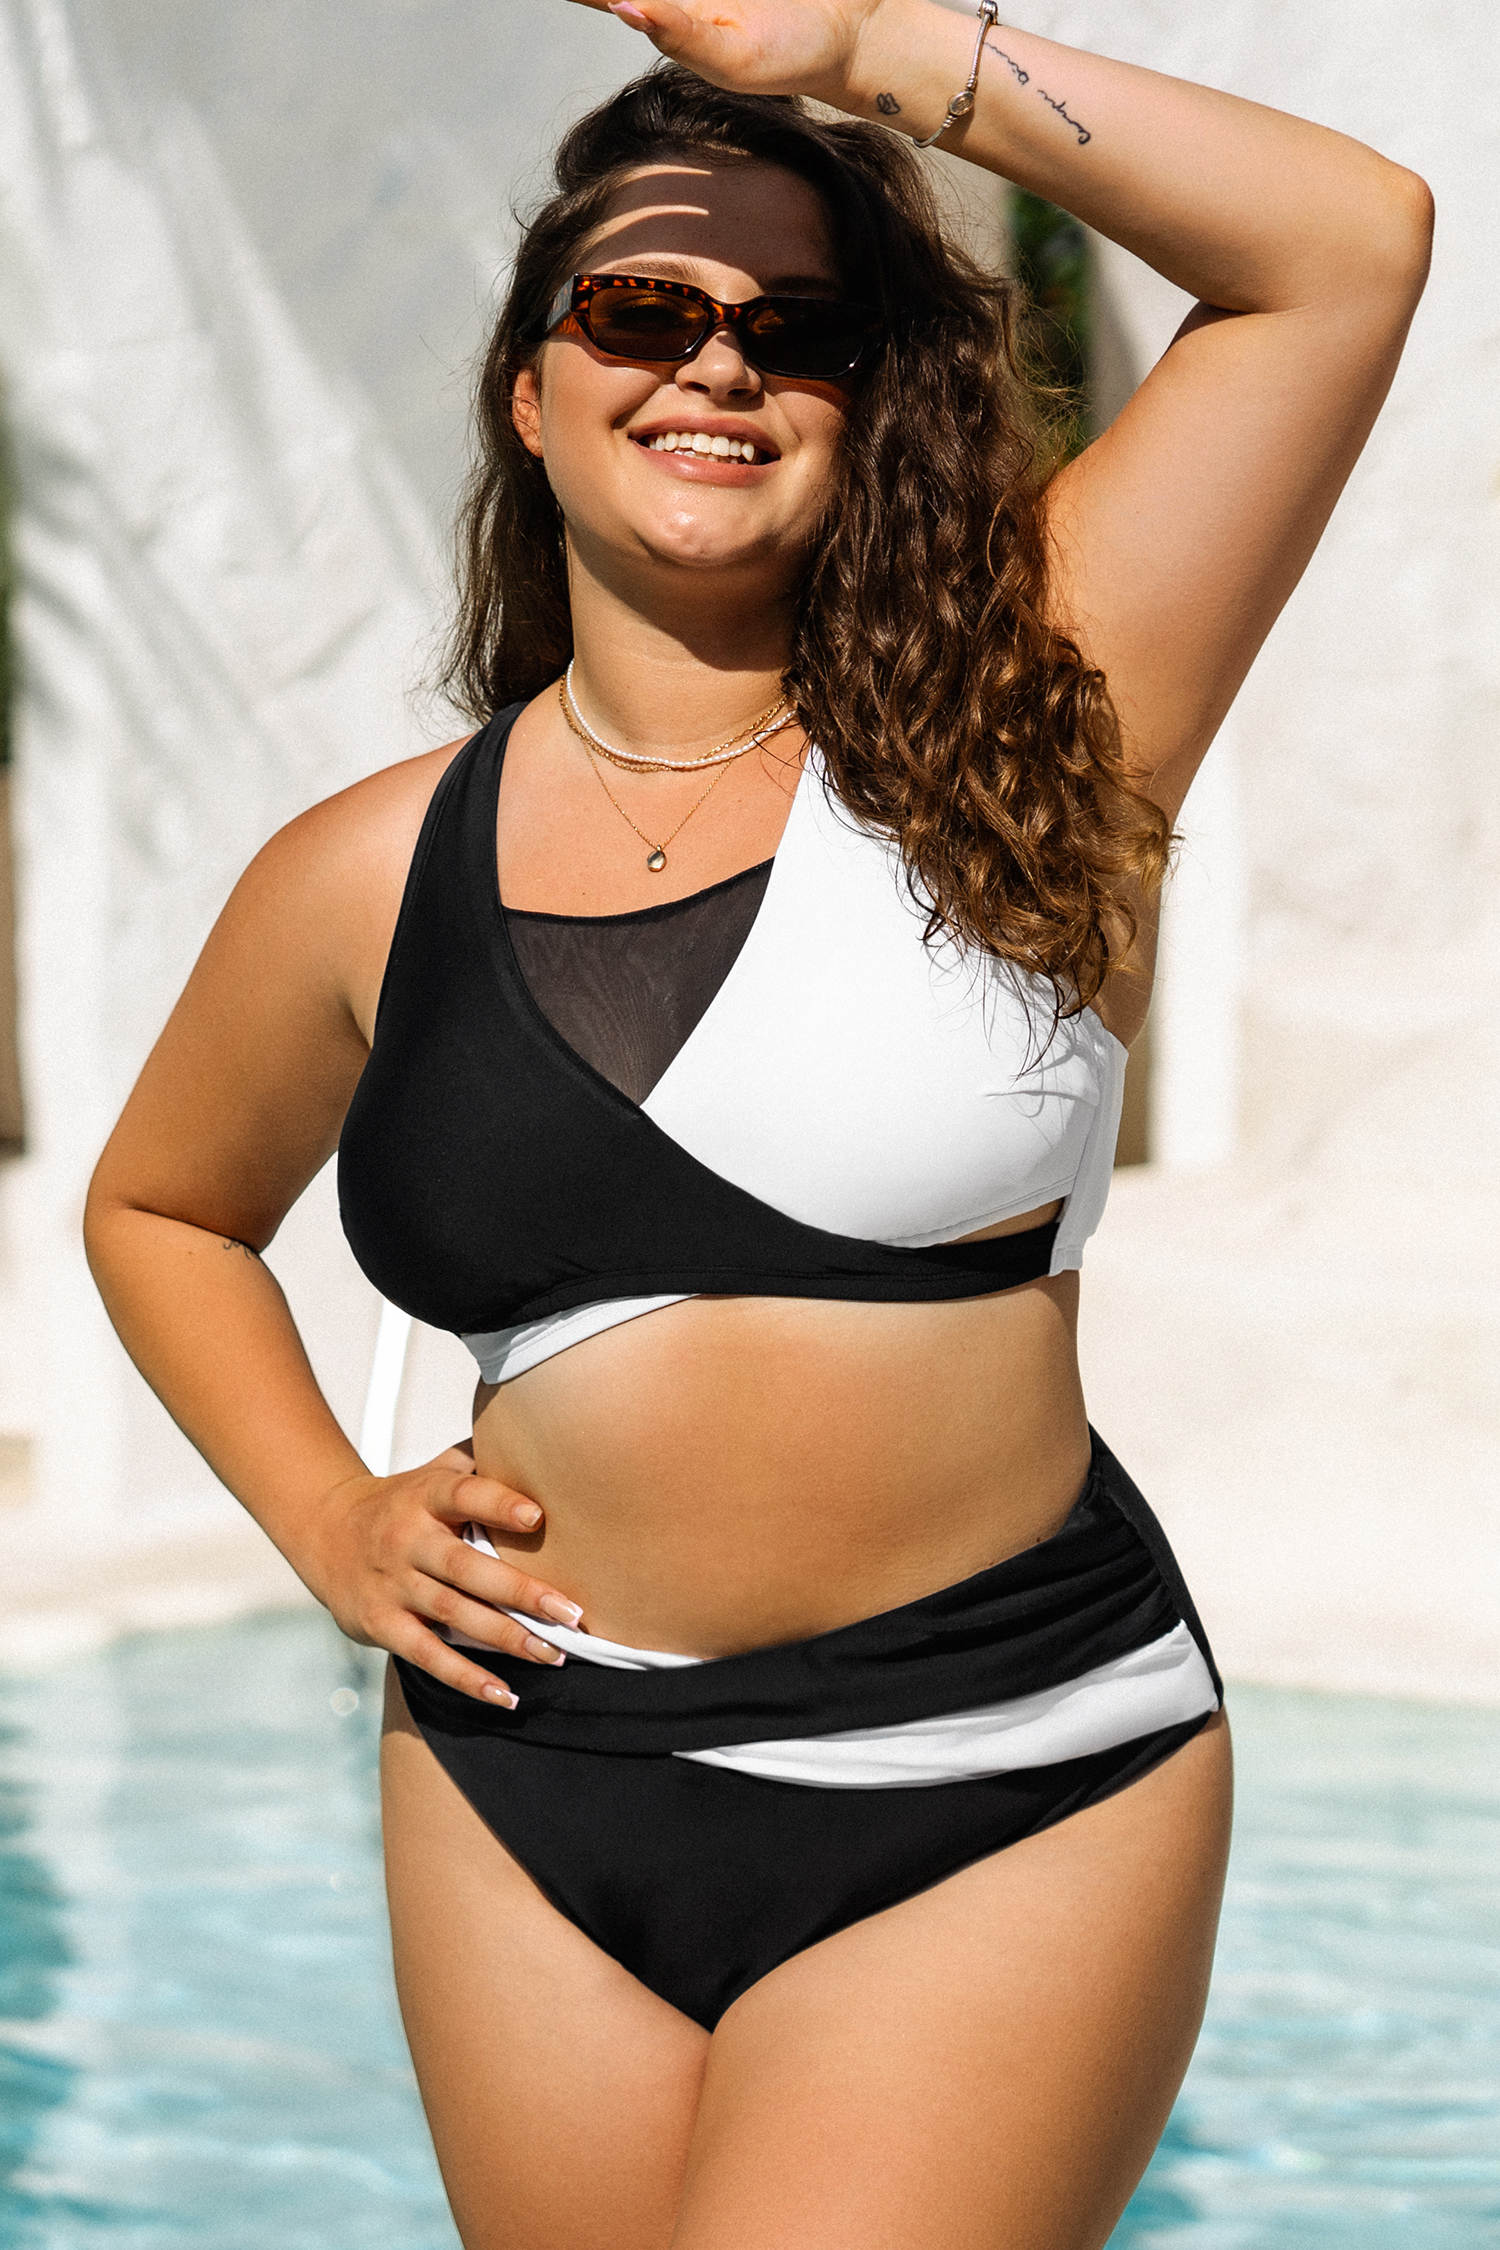 Stay cool, look cool: Filipino swimwear brands with wide size ranges